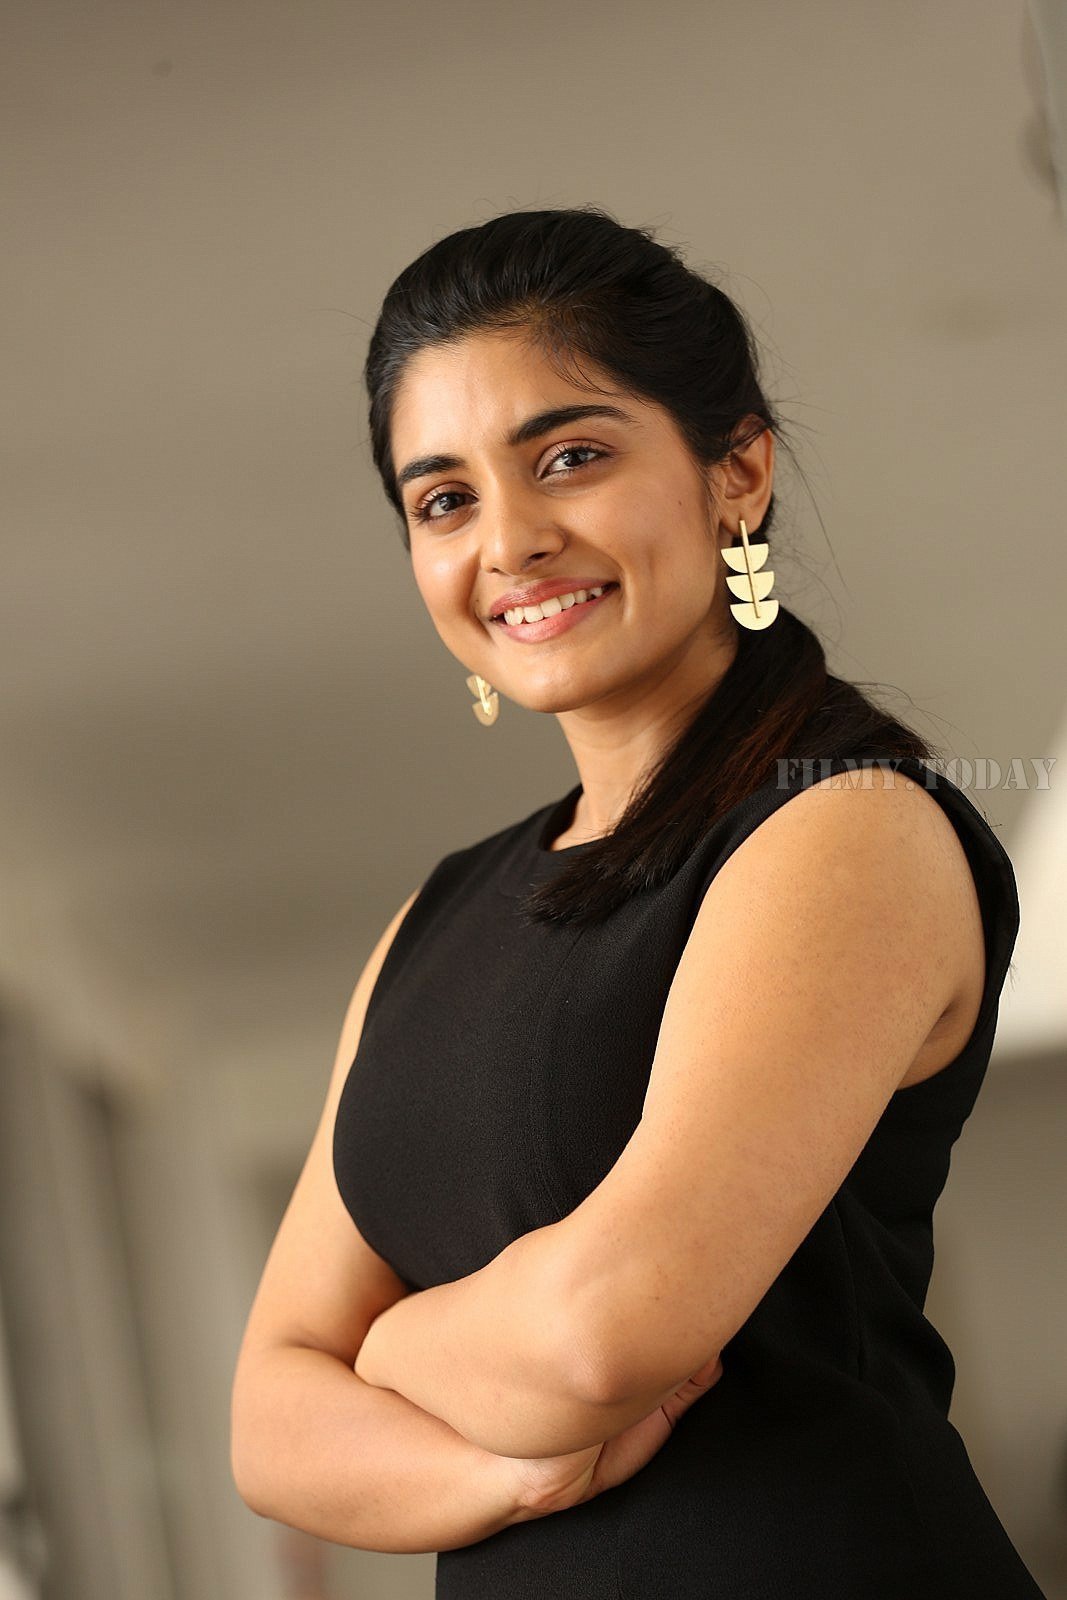 Nivetha Thomas Photos during Interview For Her Film 118 | Picture 1629803